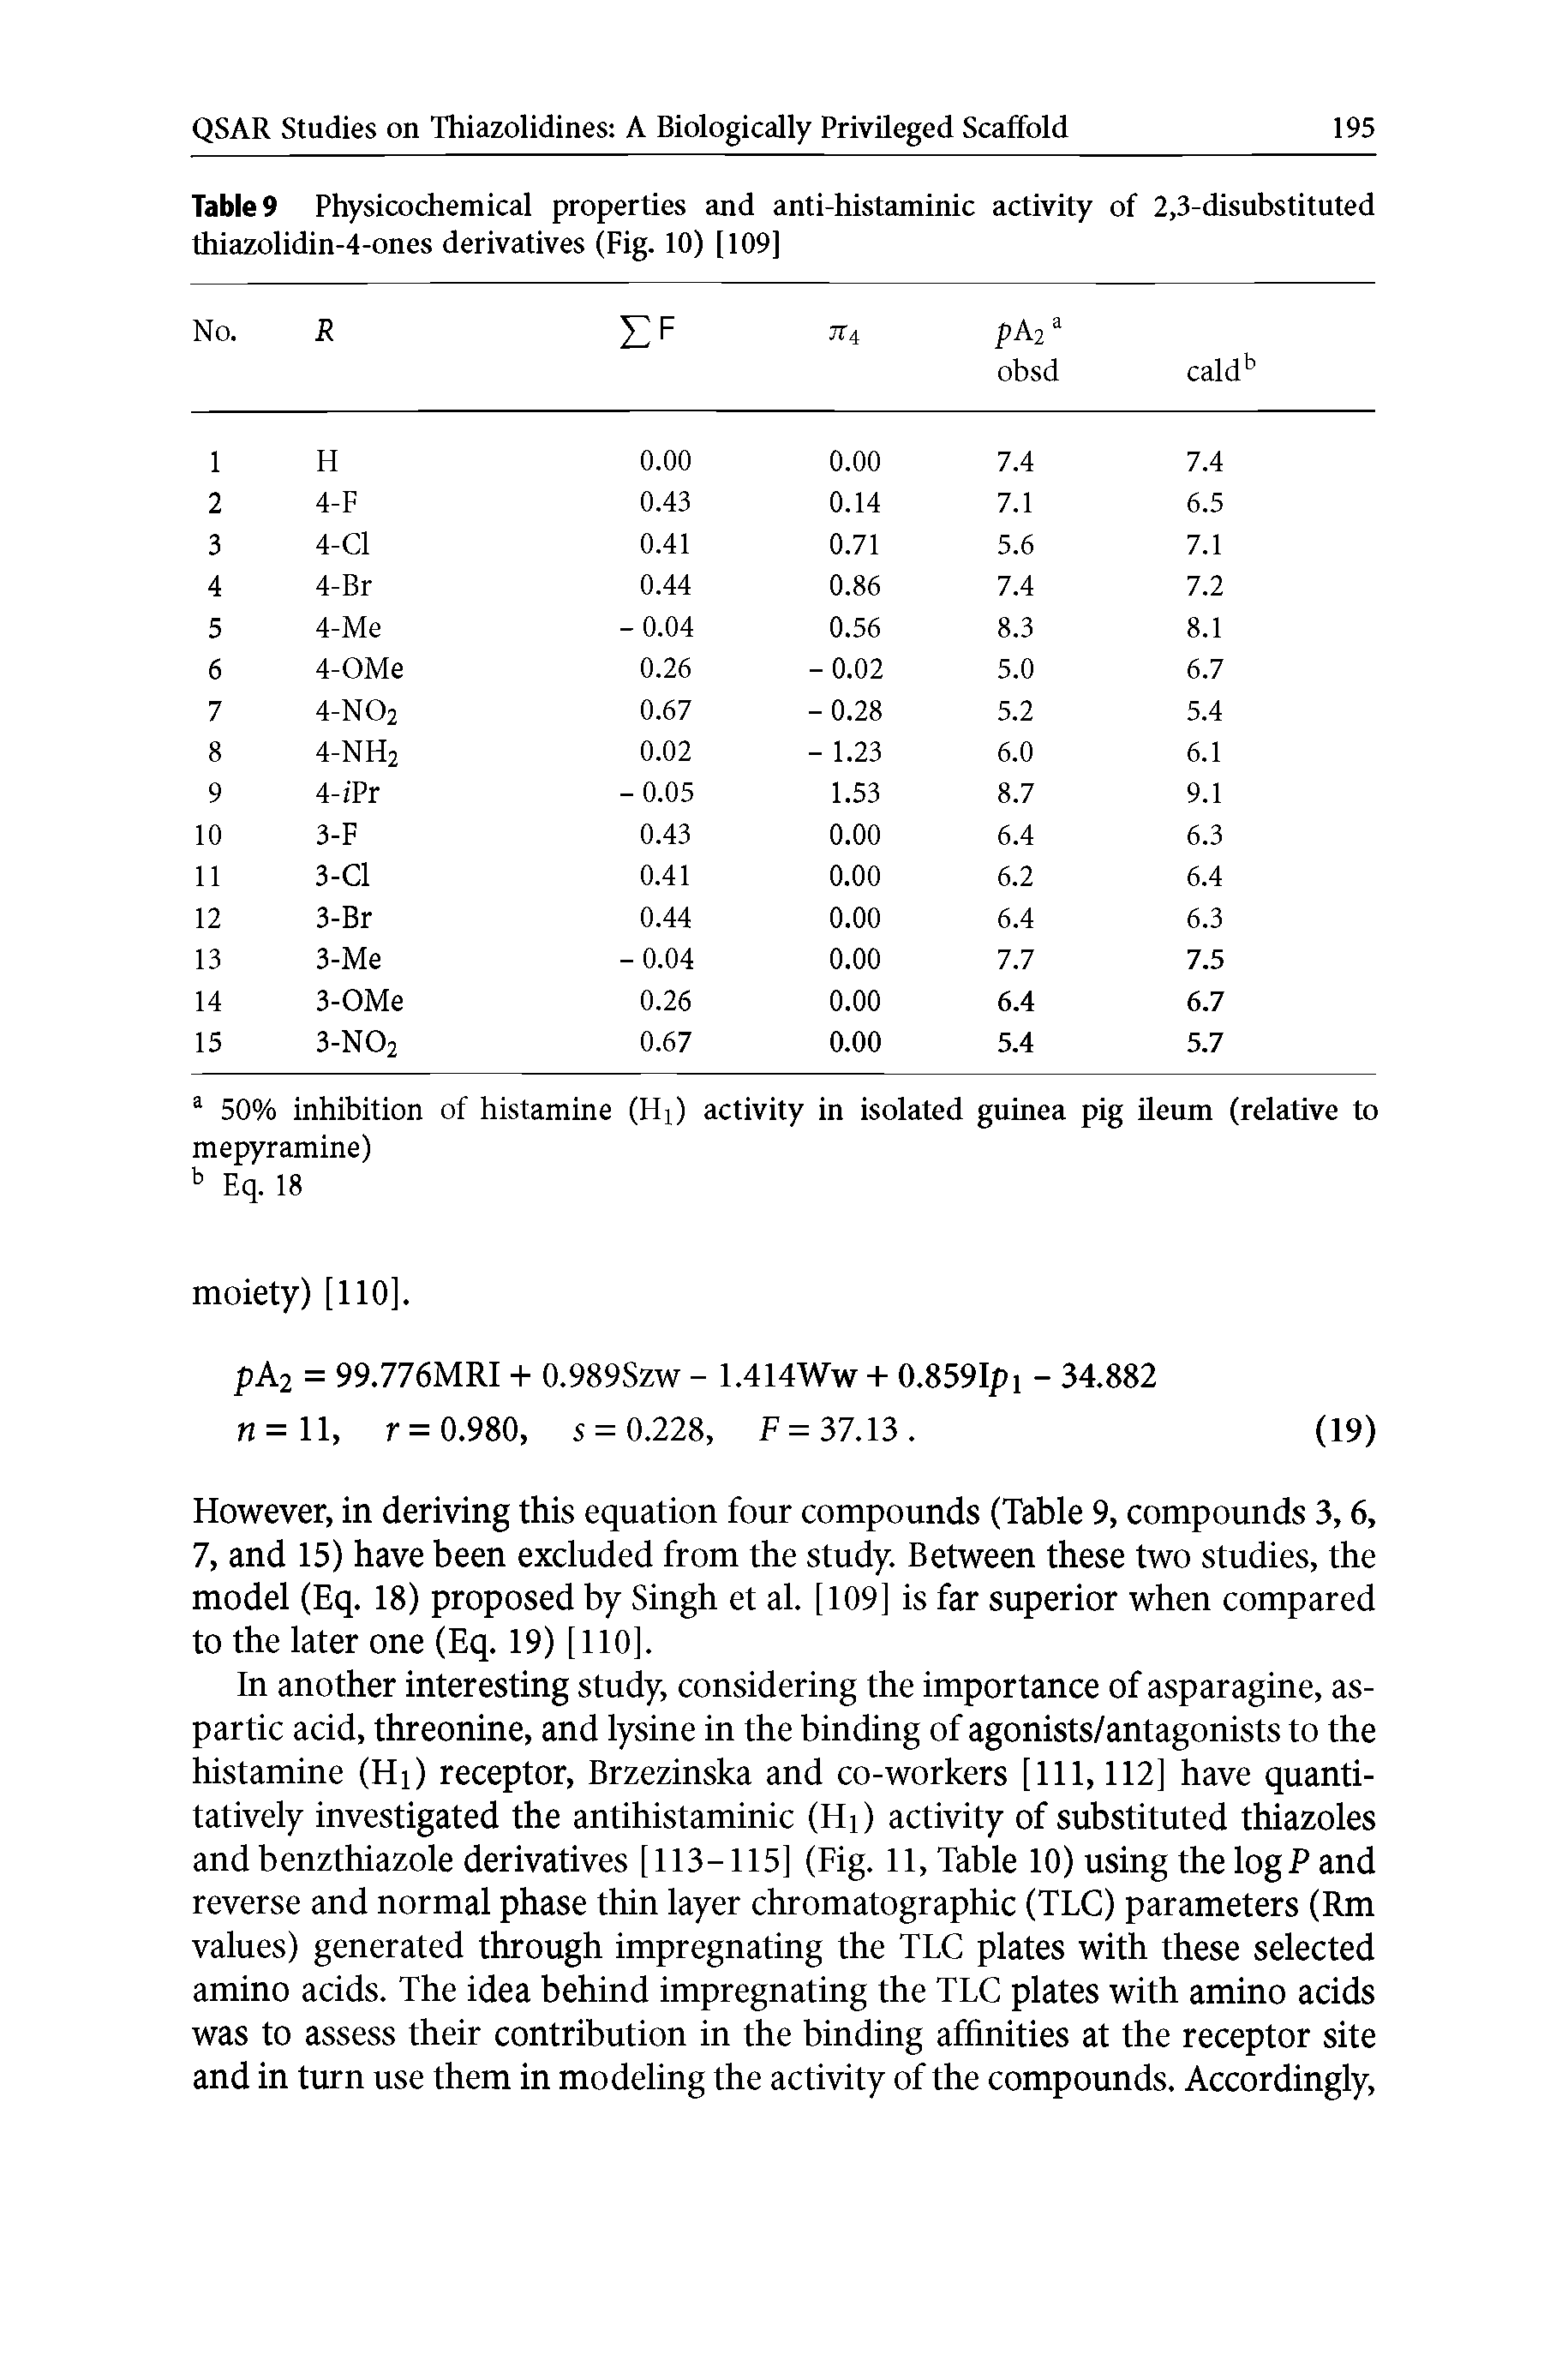 Table 9 Physicochemical properties and anti-histaminic activity of 2,3-disubstituted thiazolidin-4-ones derivatives (Fig. 10) [109]...